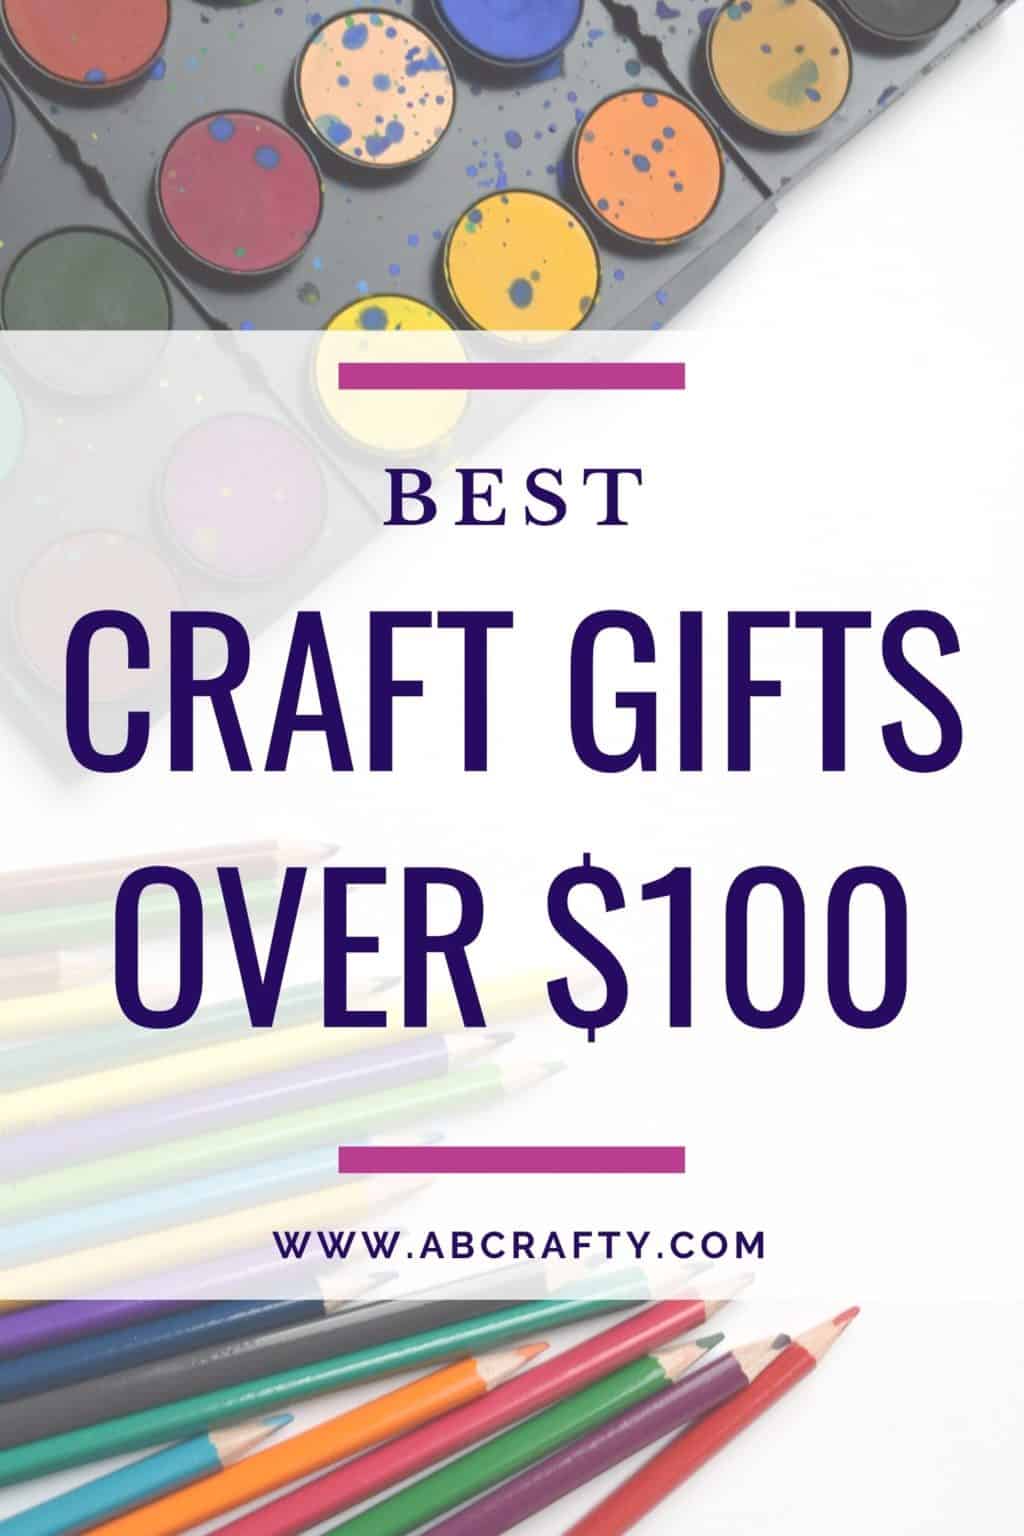 paint set and colored pencils with the title "best craft gifts over $100, by abcrafty.com"